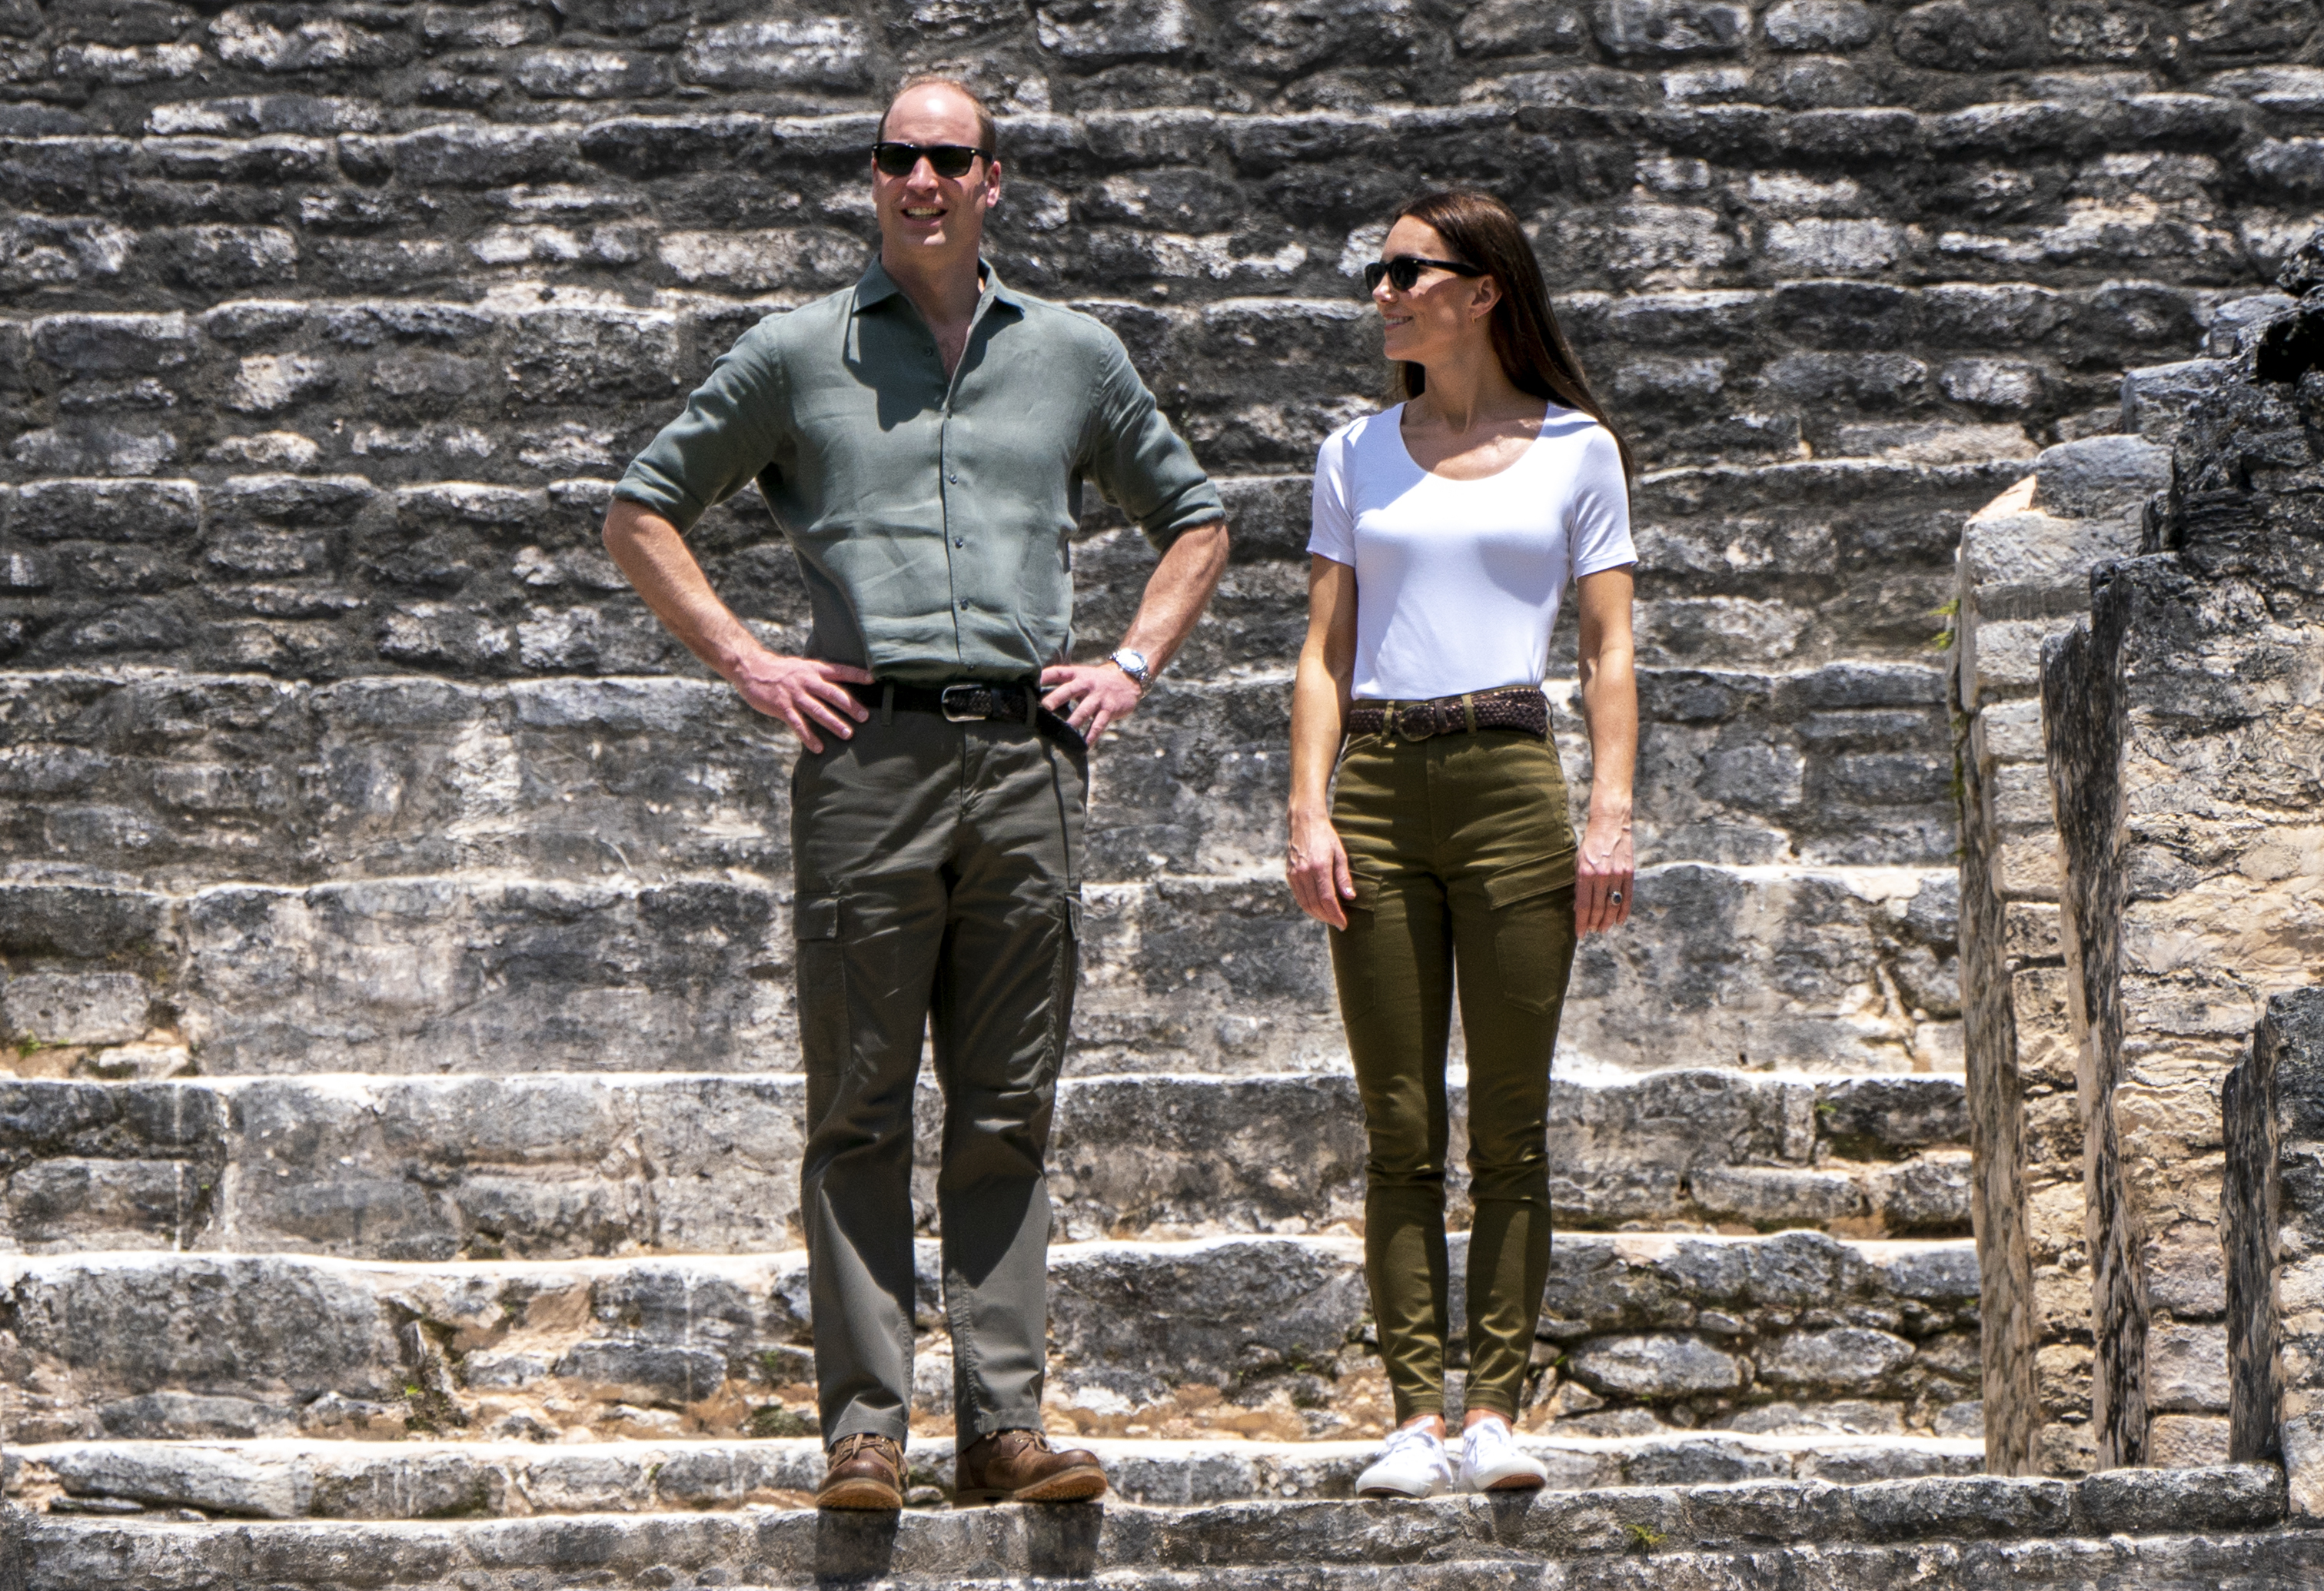 The Duke and Duchess of Cambridge at Caracol, an ancient Mayan archaeological site